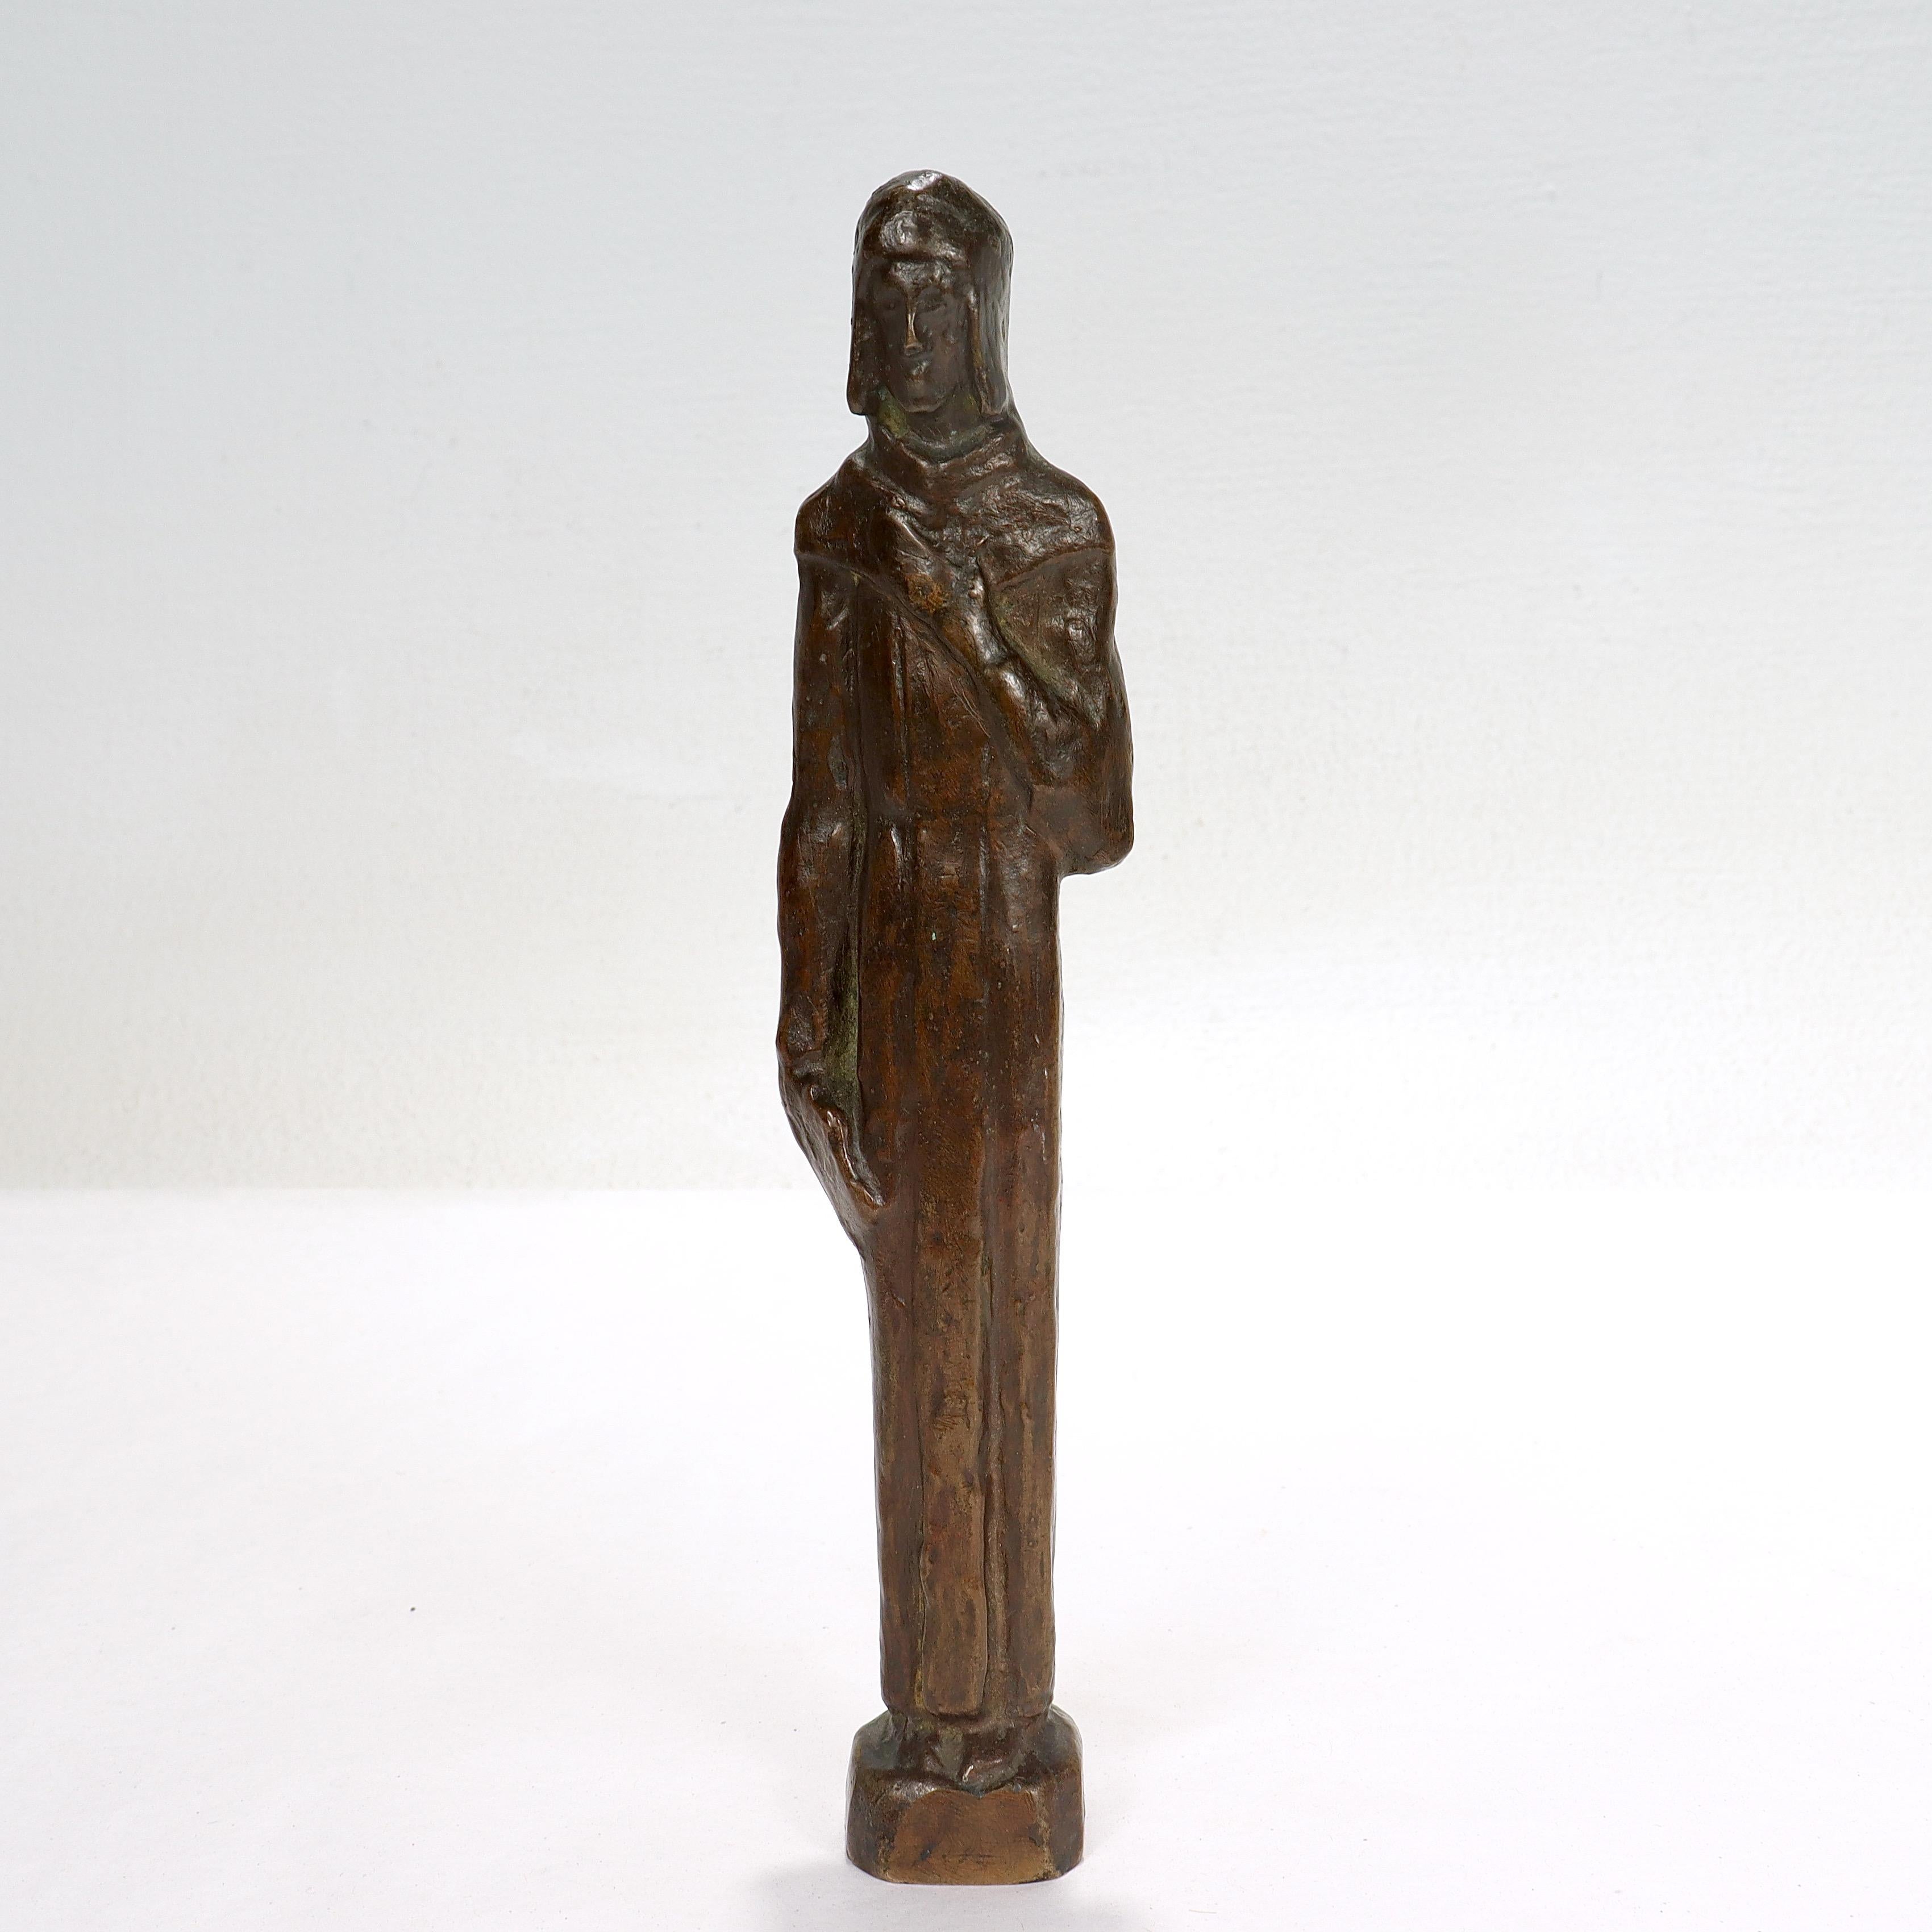 A fine Mid-Century Modern bronze sculpture.

In the form of a Franciscan monk.

The base has a later copper insert and threading for possible mounting on a plinth. 

Simply a wonderful piece of sculpture!

Date:
Mid-20th Century

Overall